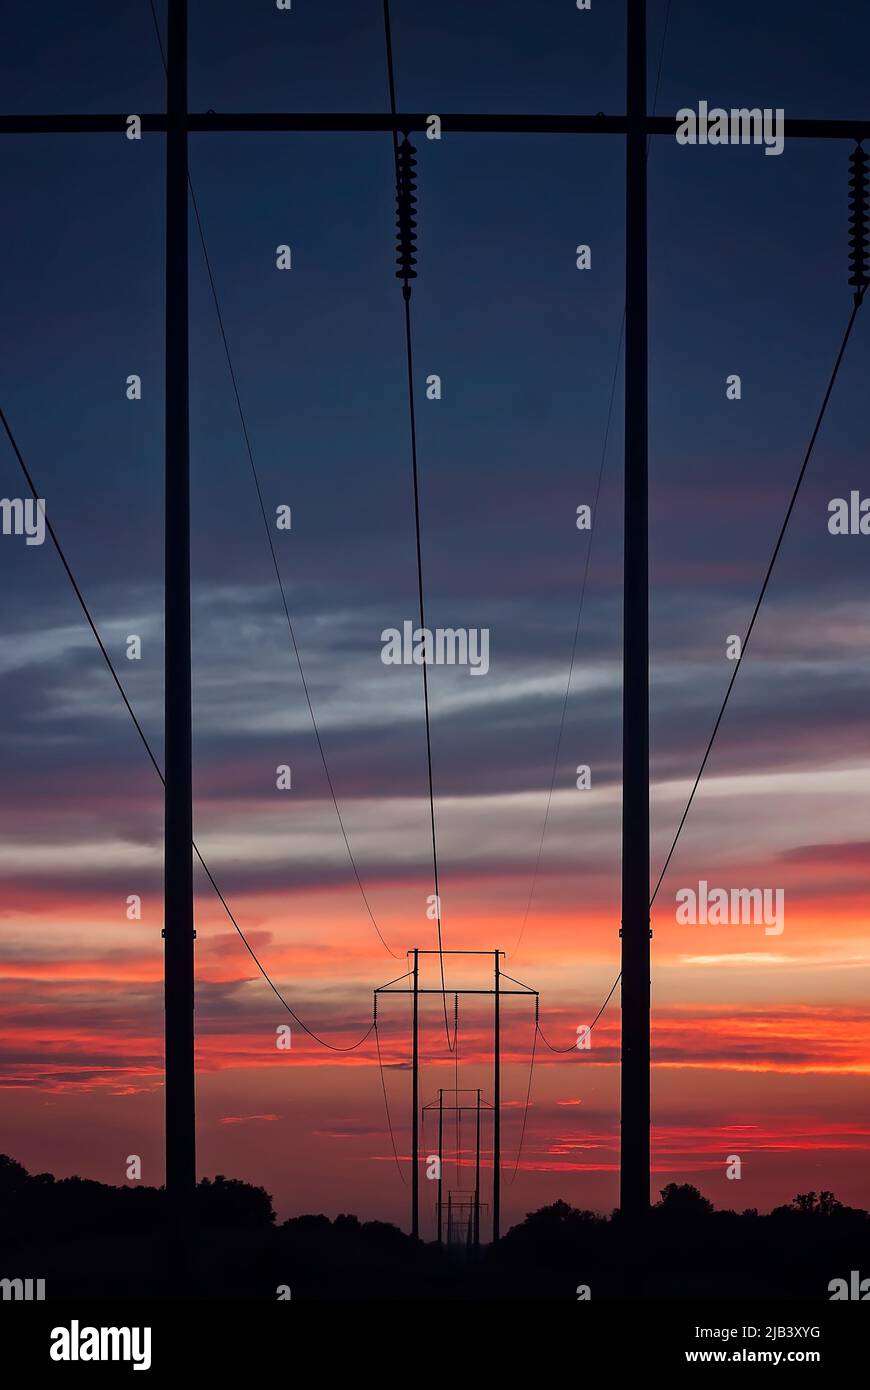 Wooden H-frame transmission line power poles are pictured at sunset, June 13, 2011, in Columbus, Mississippi. Stock Photo